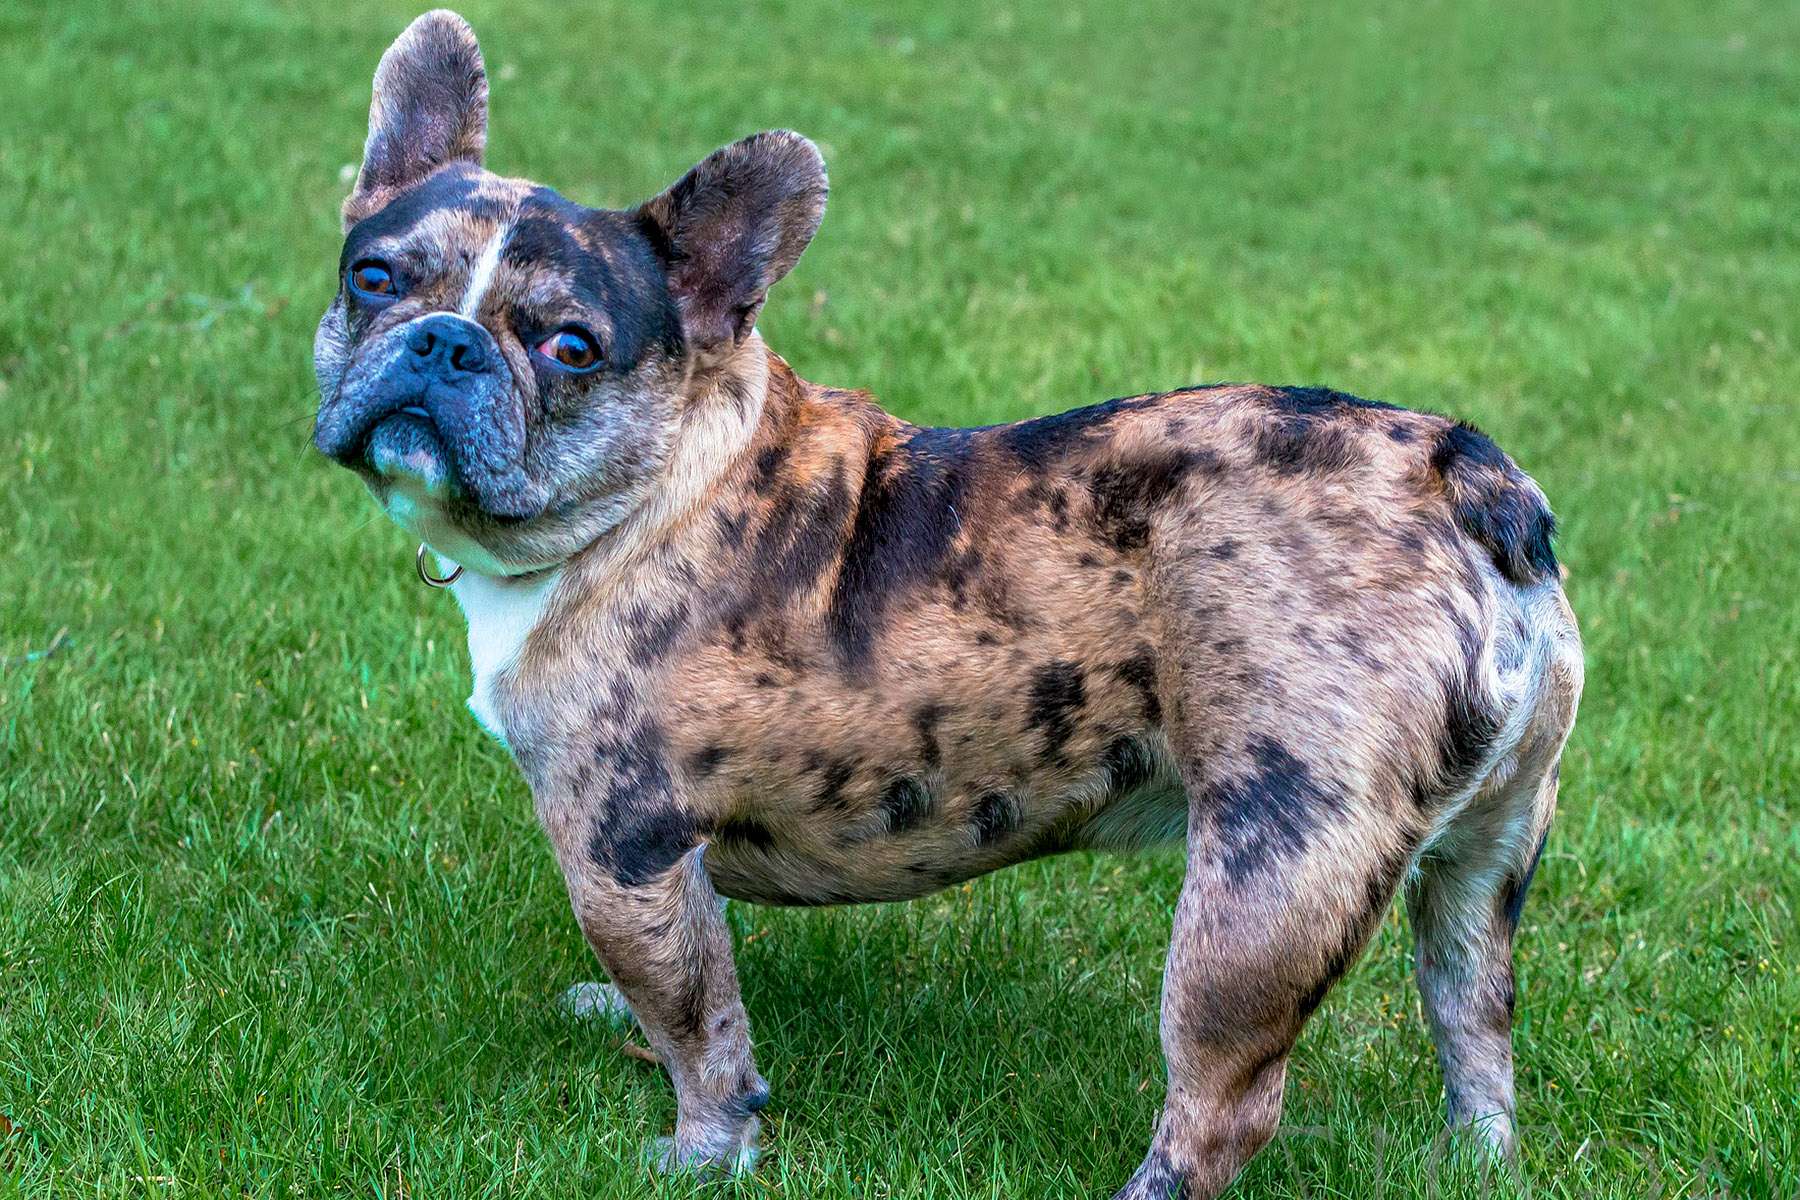 Brindle French Bulldogs